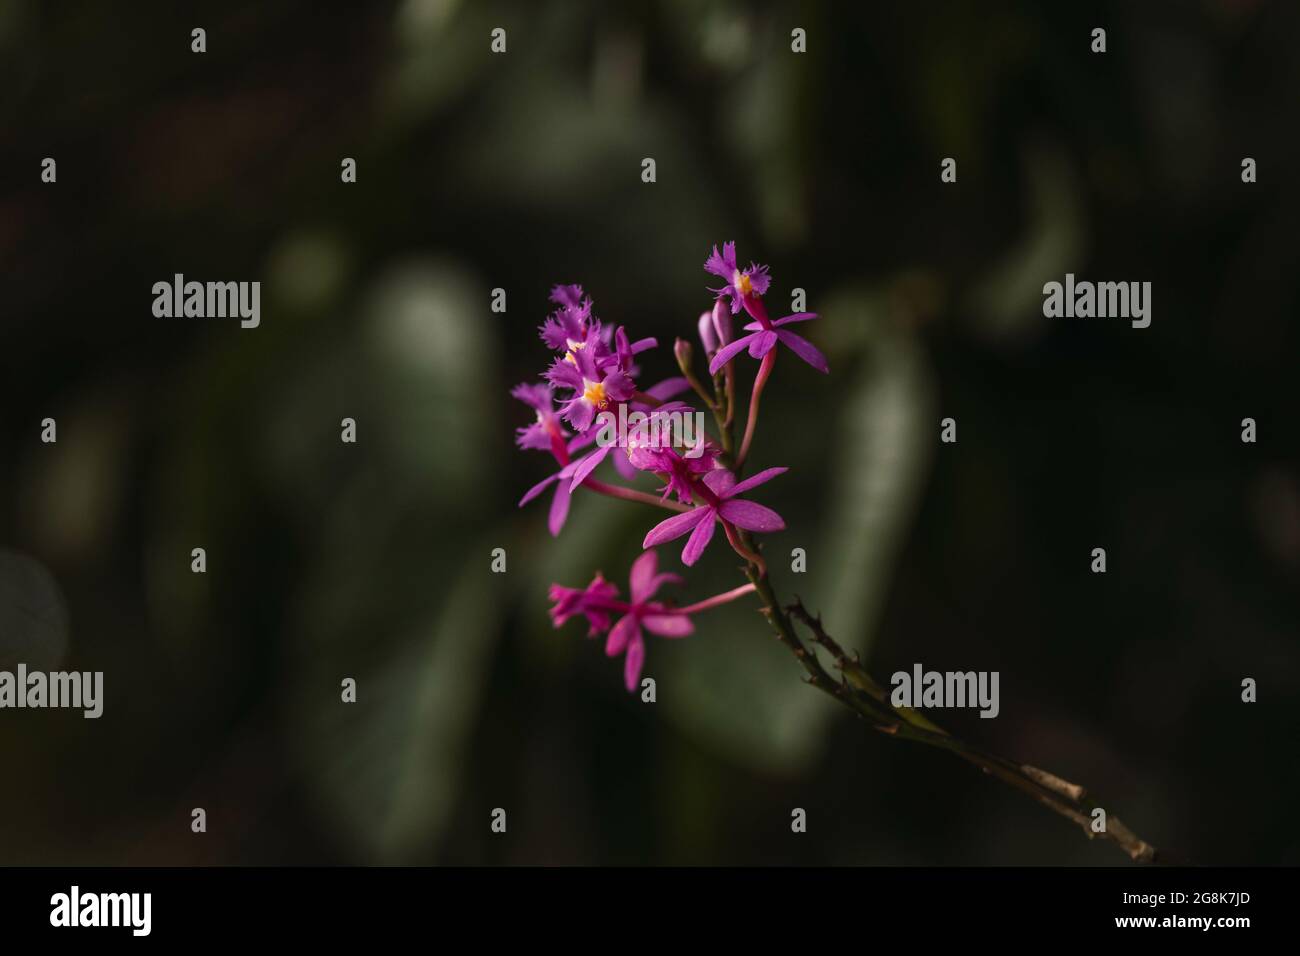 Closeup of a beautiful dainty epidendrum flower on a thin branch with a blurry background Stock Photo